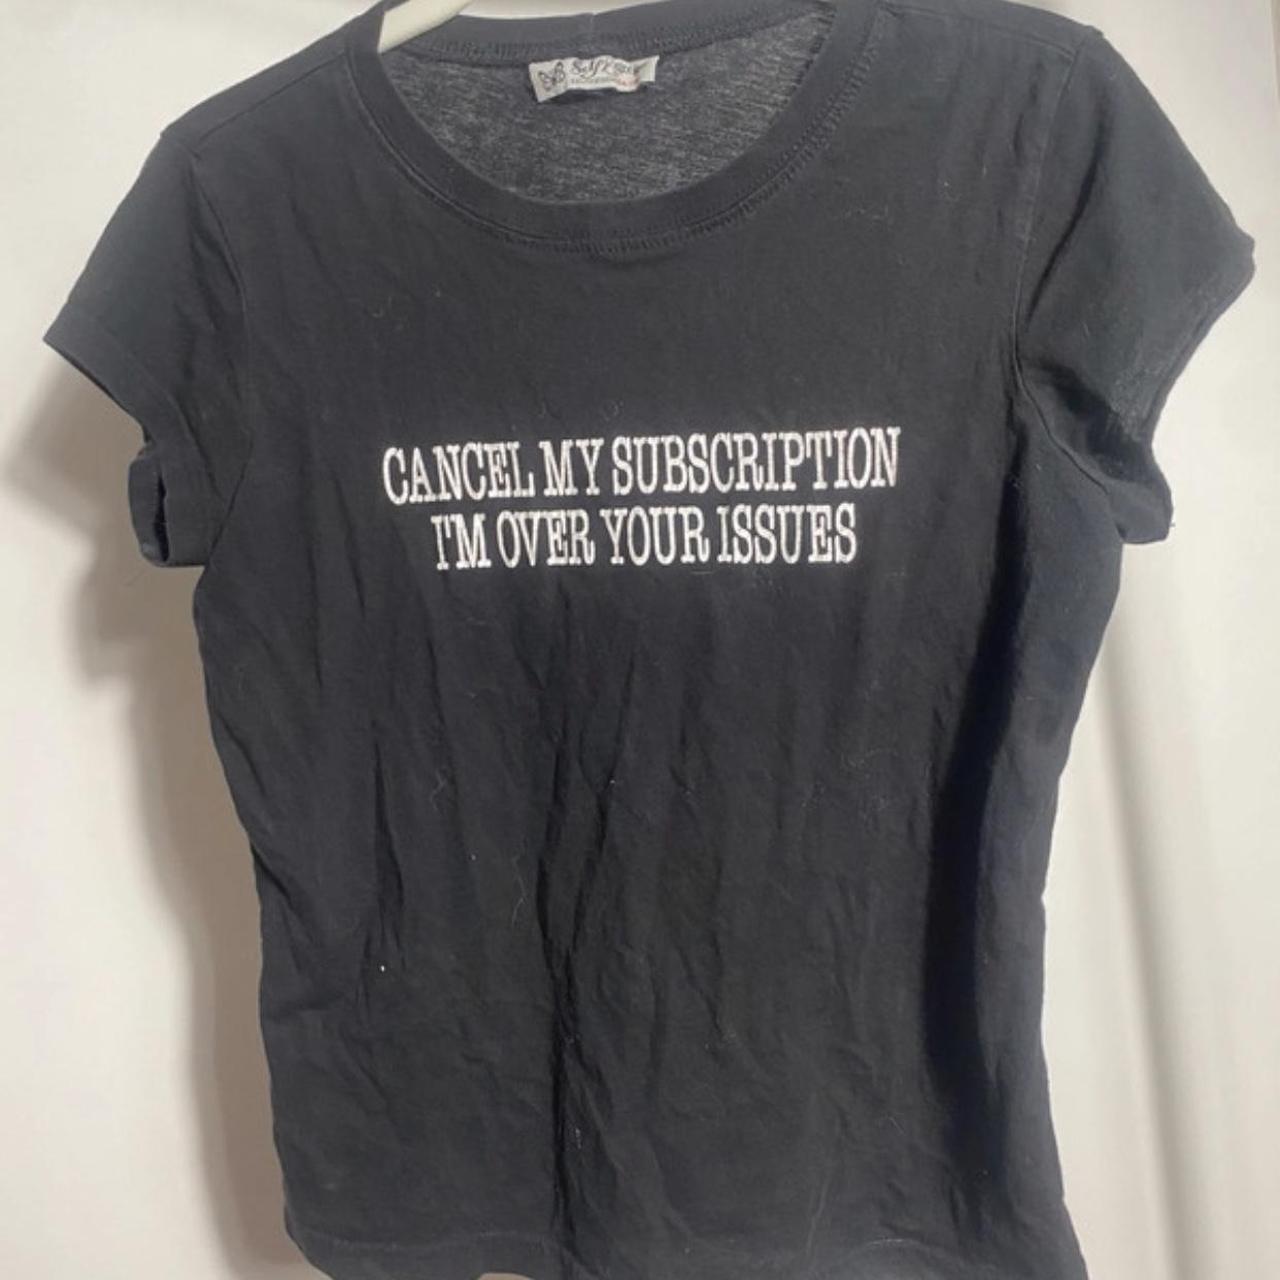 Over your issues self esteem baby tee size small - Depop